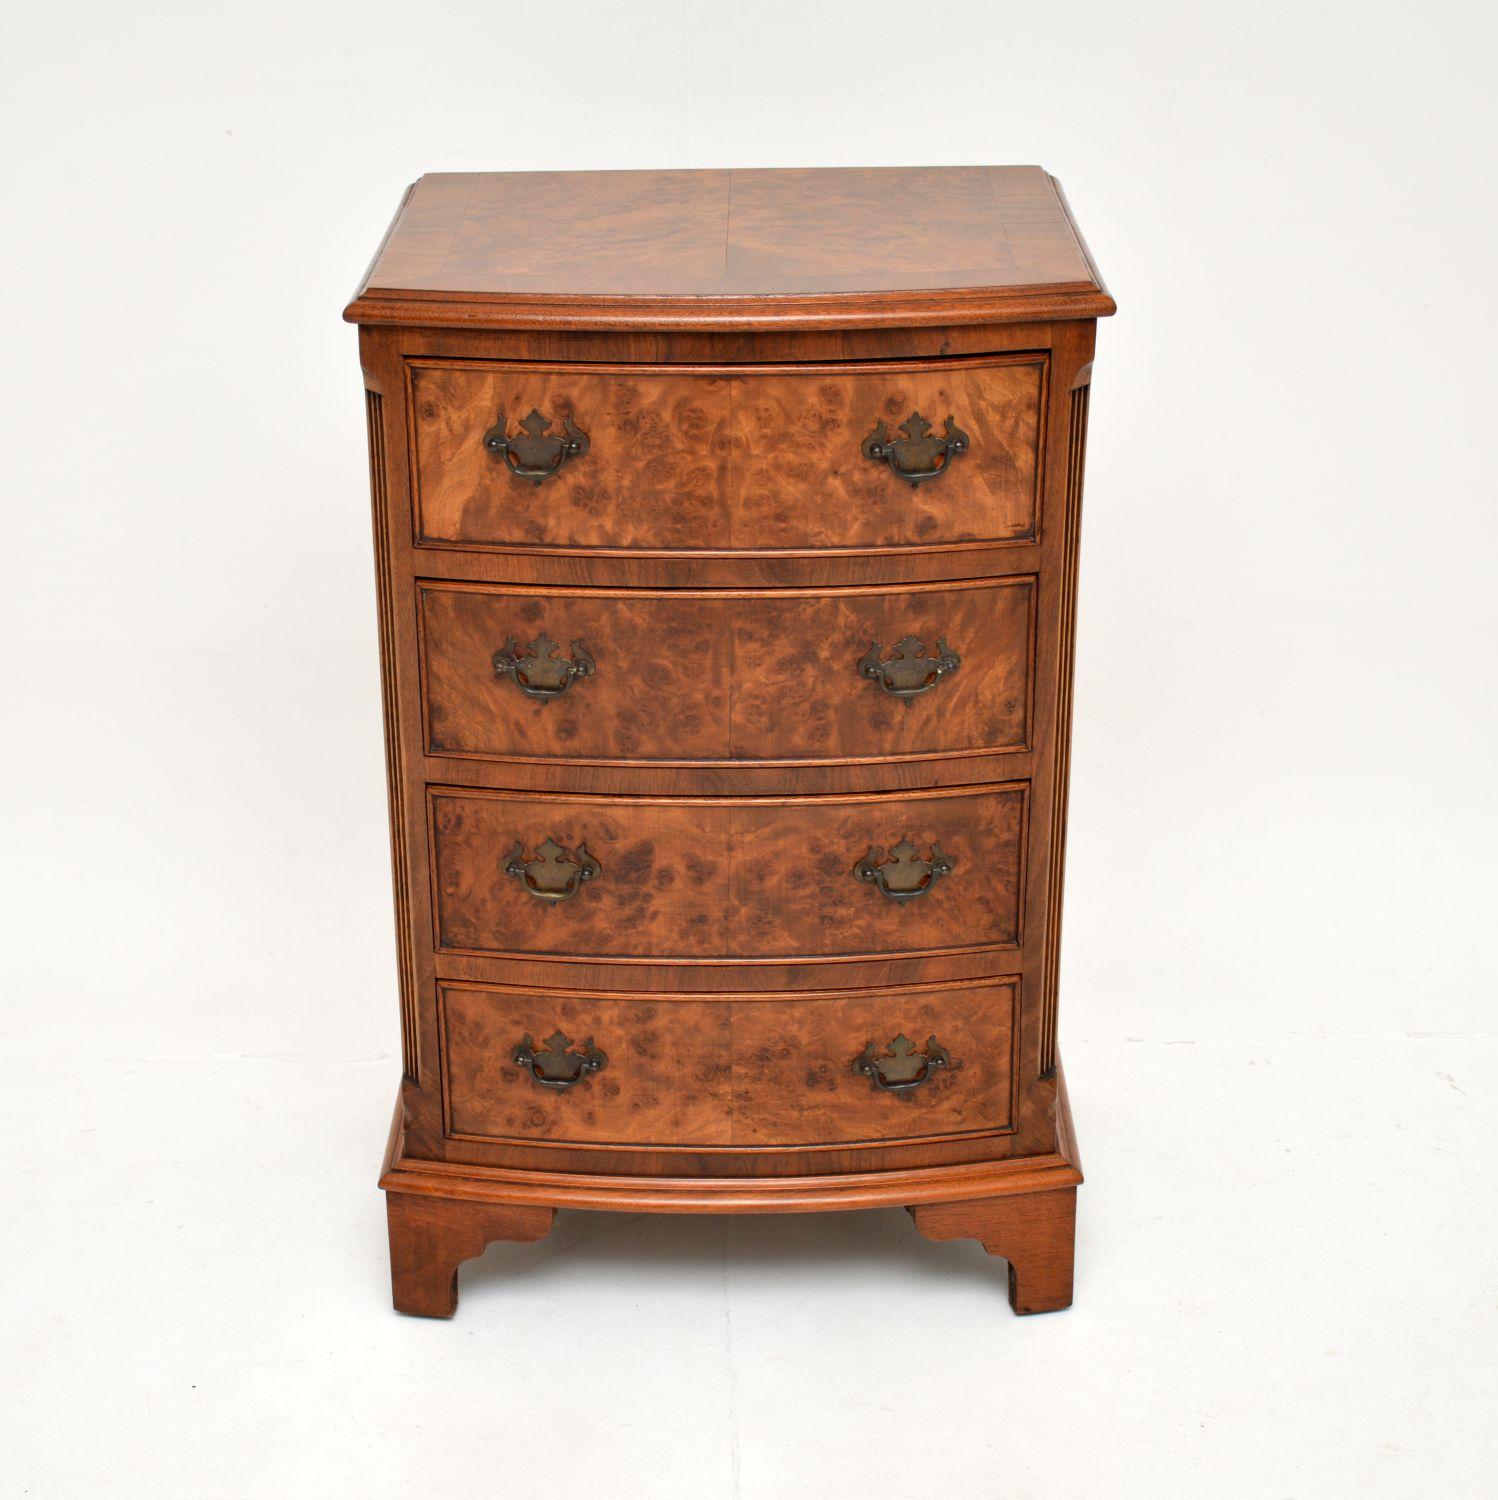 A stunning antique bow front chest of drawers in burr walnut. This was made in England, it dates from around the 1900-1920 period.

It is of superb quality and is a very useful size. This has a gorgeous colour tone and amazing grain patterns